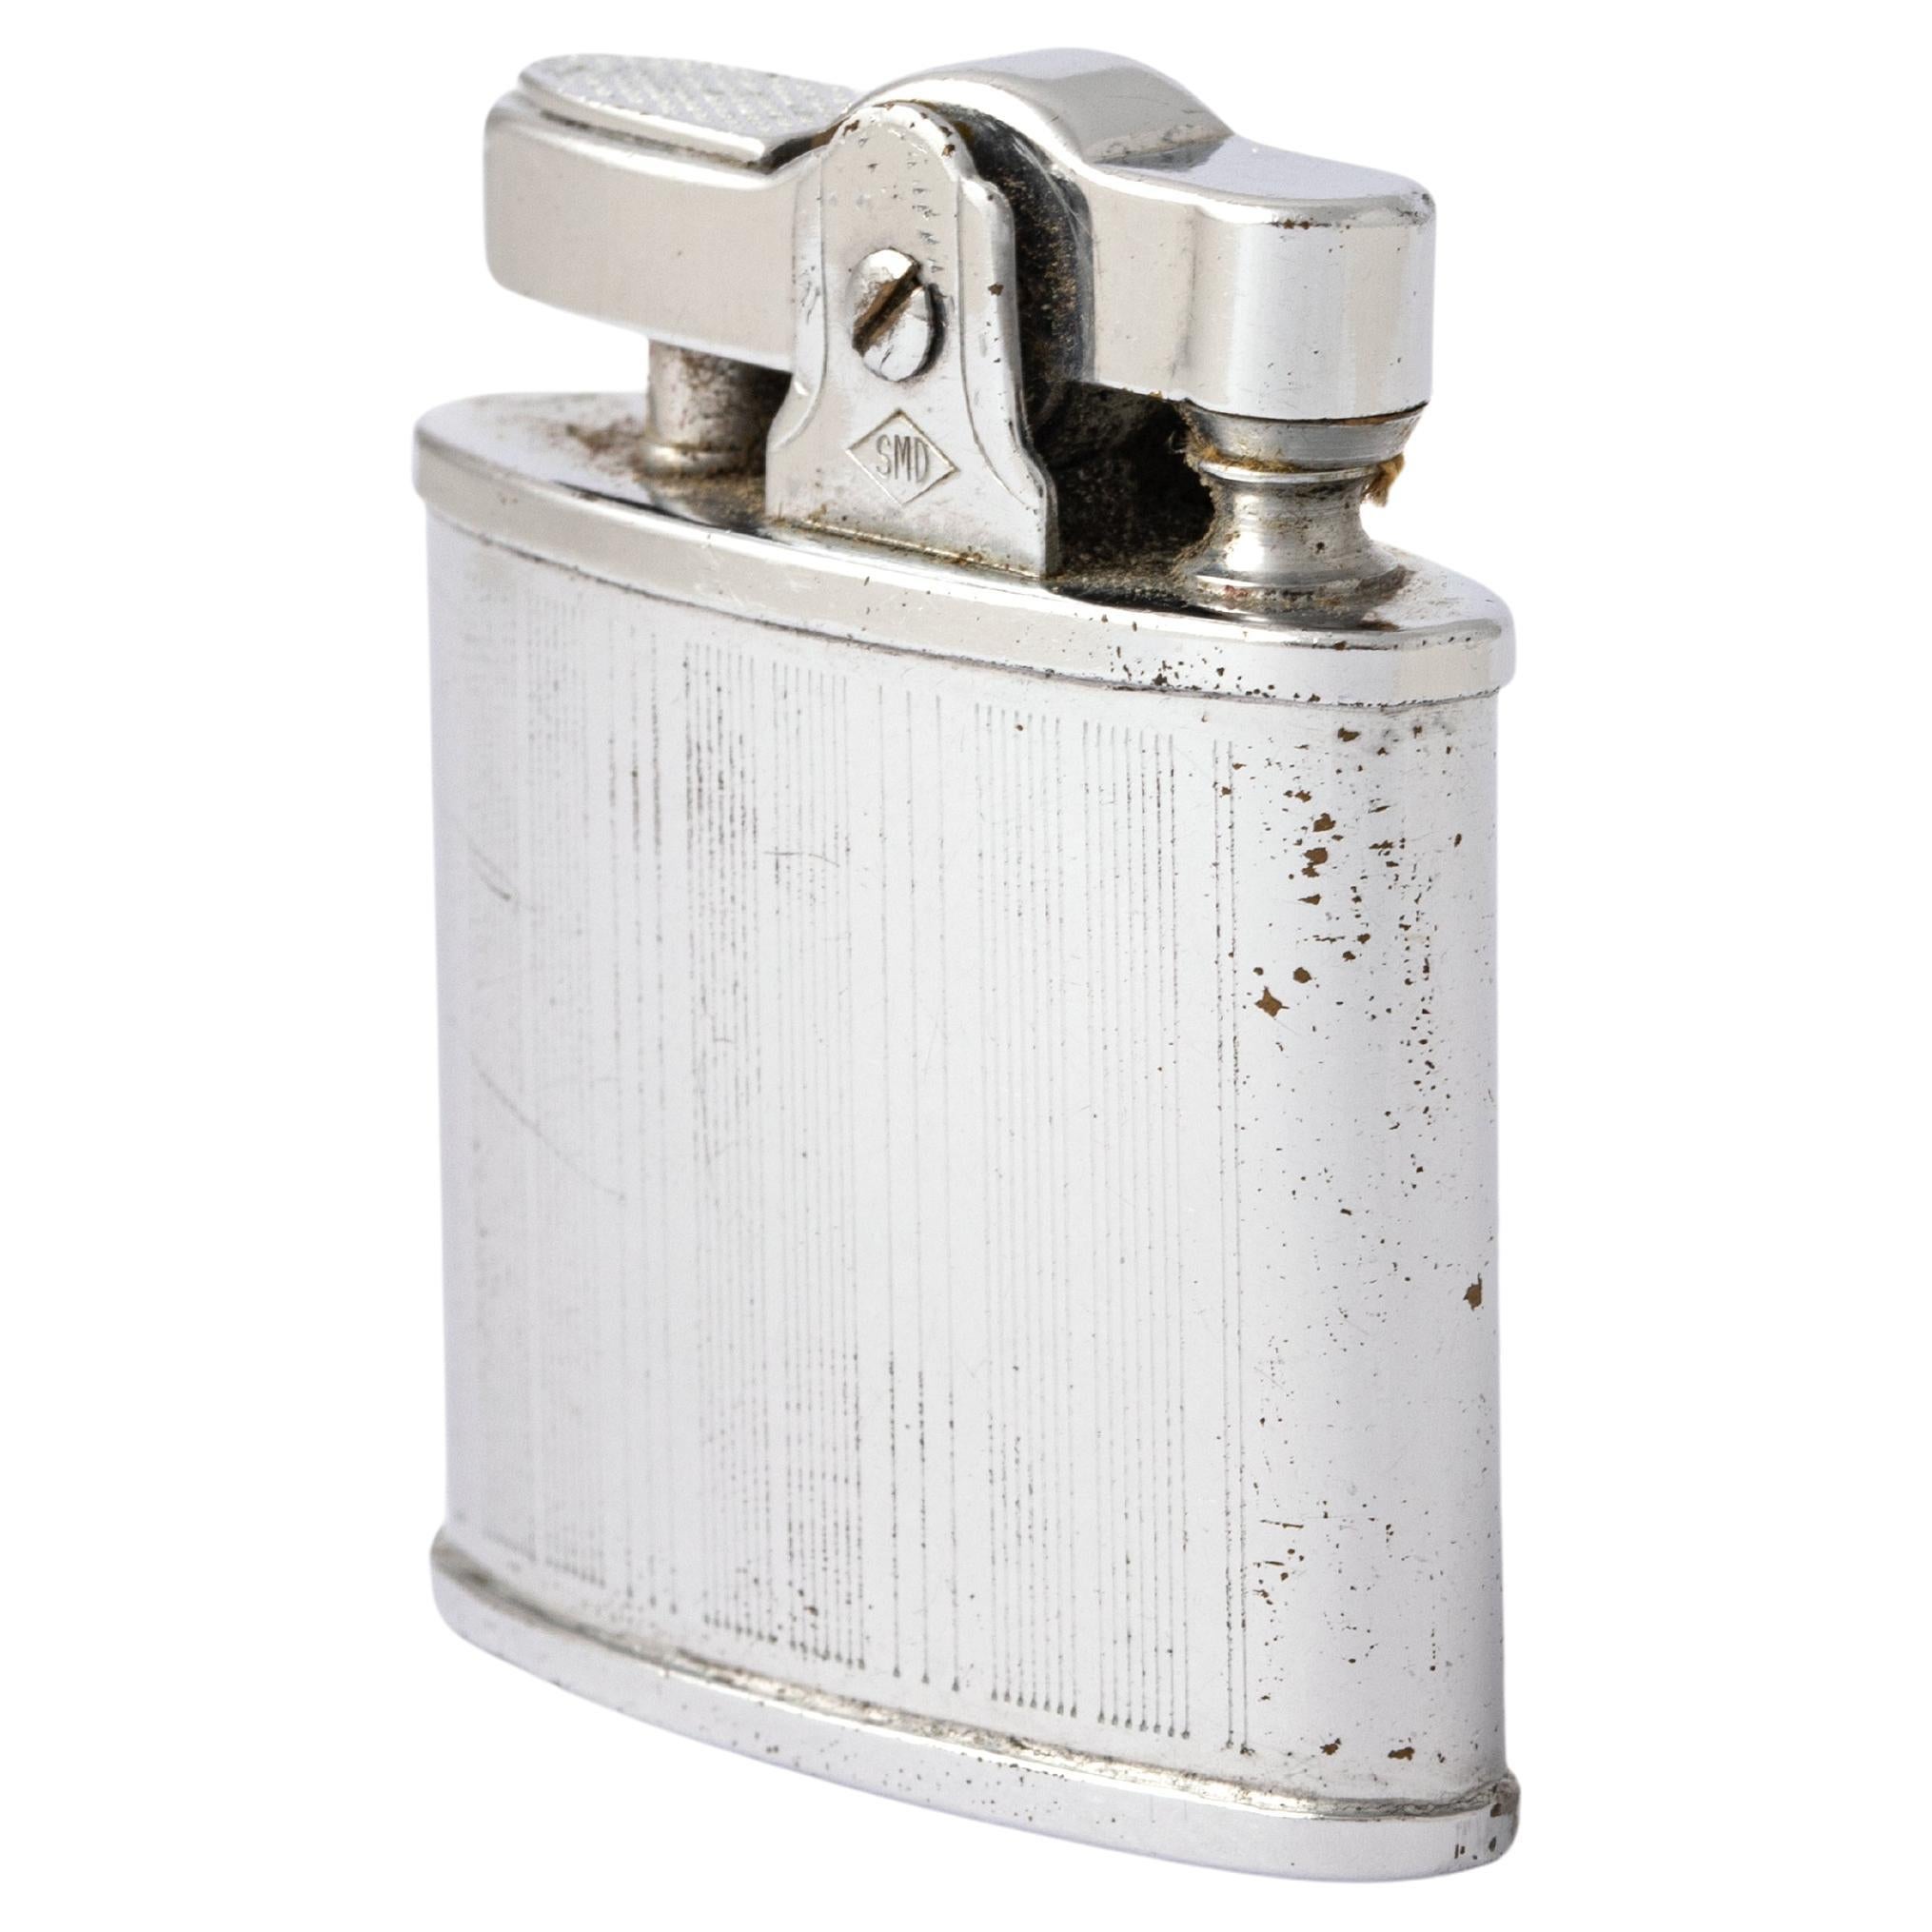 Omega Lighter. 
Circa 1950.
Total weight: 36.58 grams.
Height: 4.80 centimeters.
Width: 3.90 centimeters.
Depth: 1.40 centimeters.
Some traces of oxidation.
Item is not guaranteed to work.
